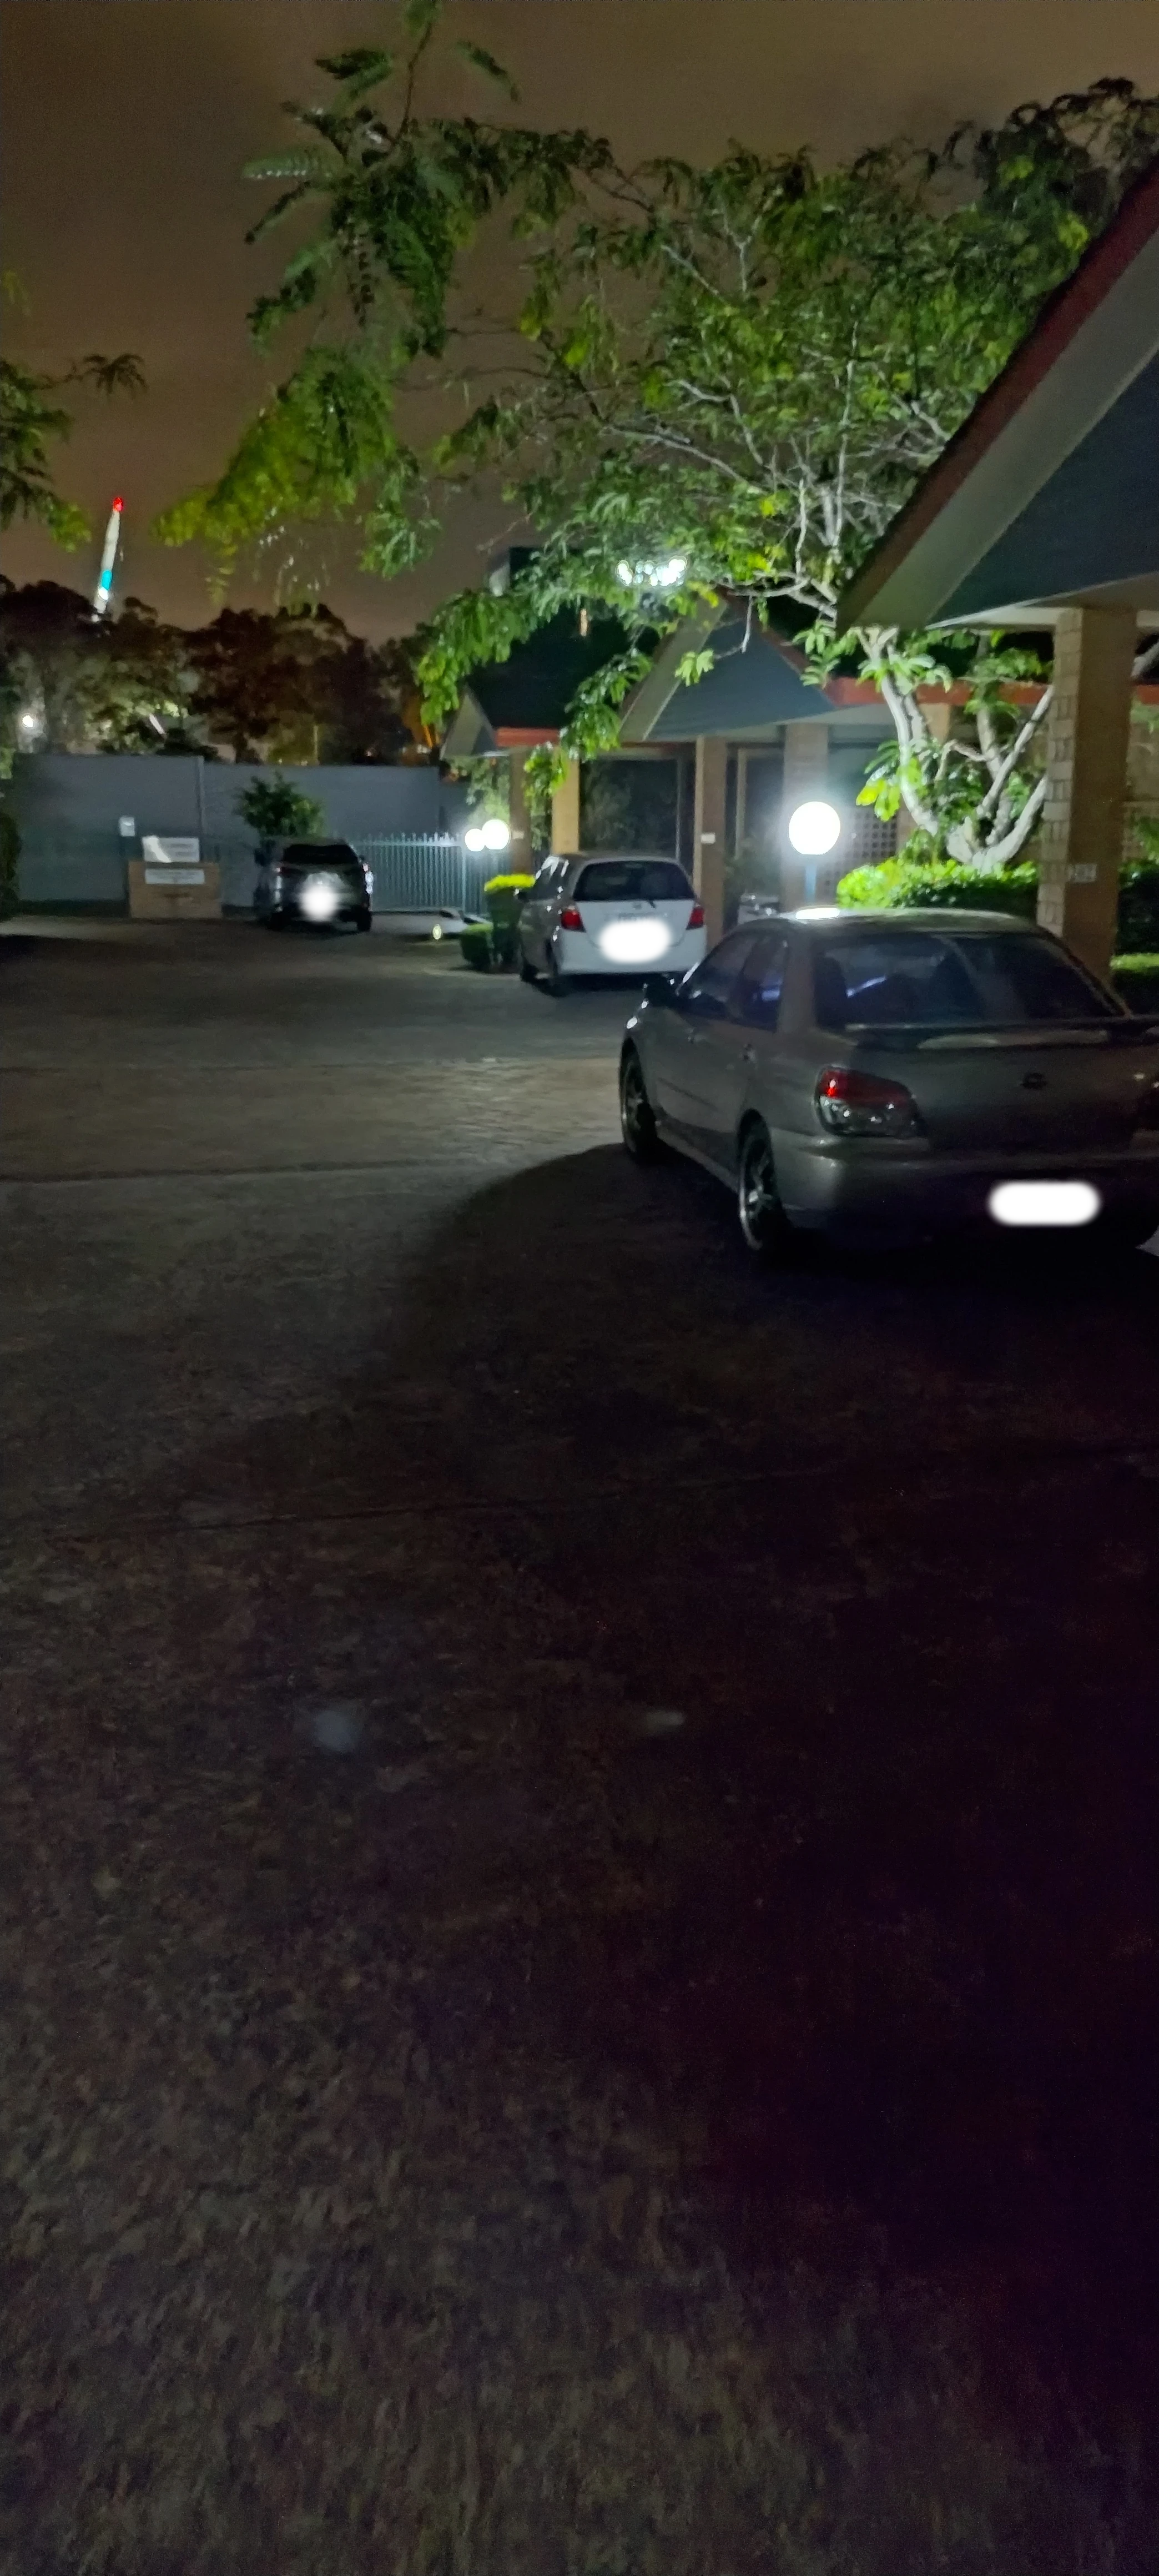 SP52948-three-illegally-parked-cars-in-front-of-committee-member-towhouse-Lot-200-and-carwash-area-photo-1-12Nov2022.webp